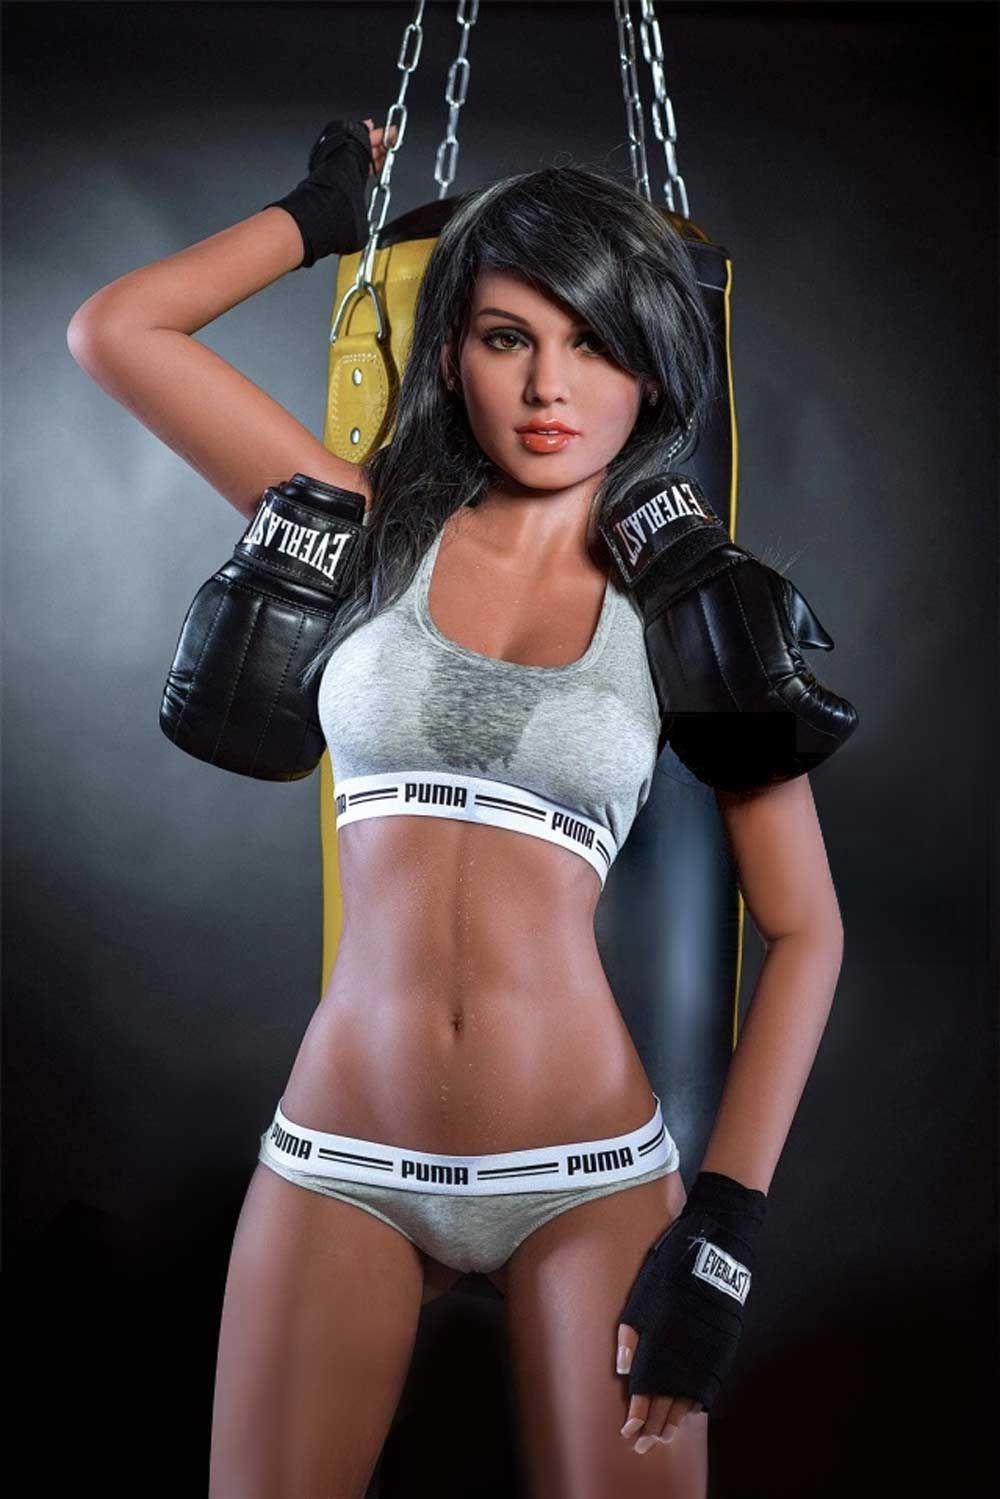 Sex doll with boxing gloves hanging around her neck